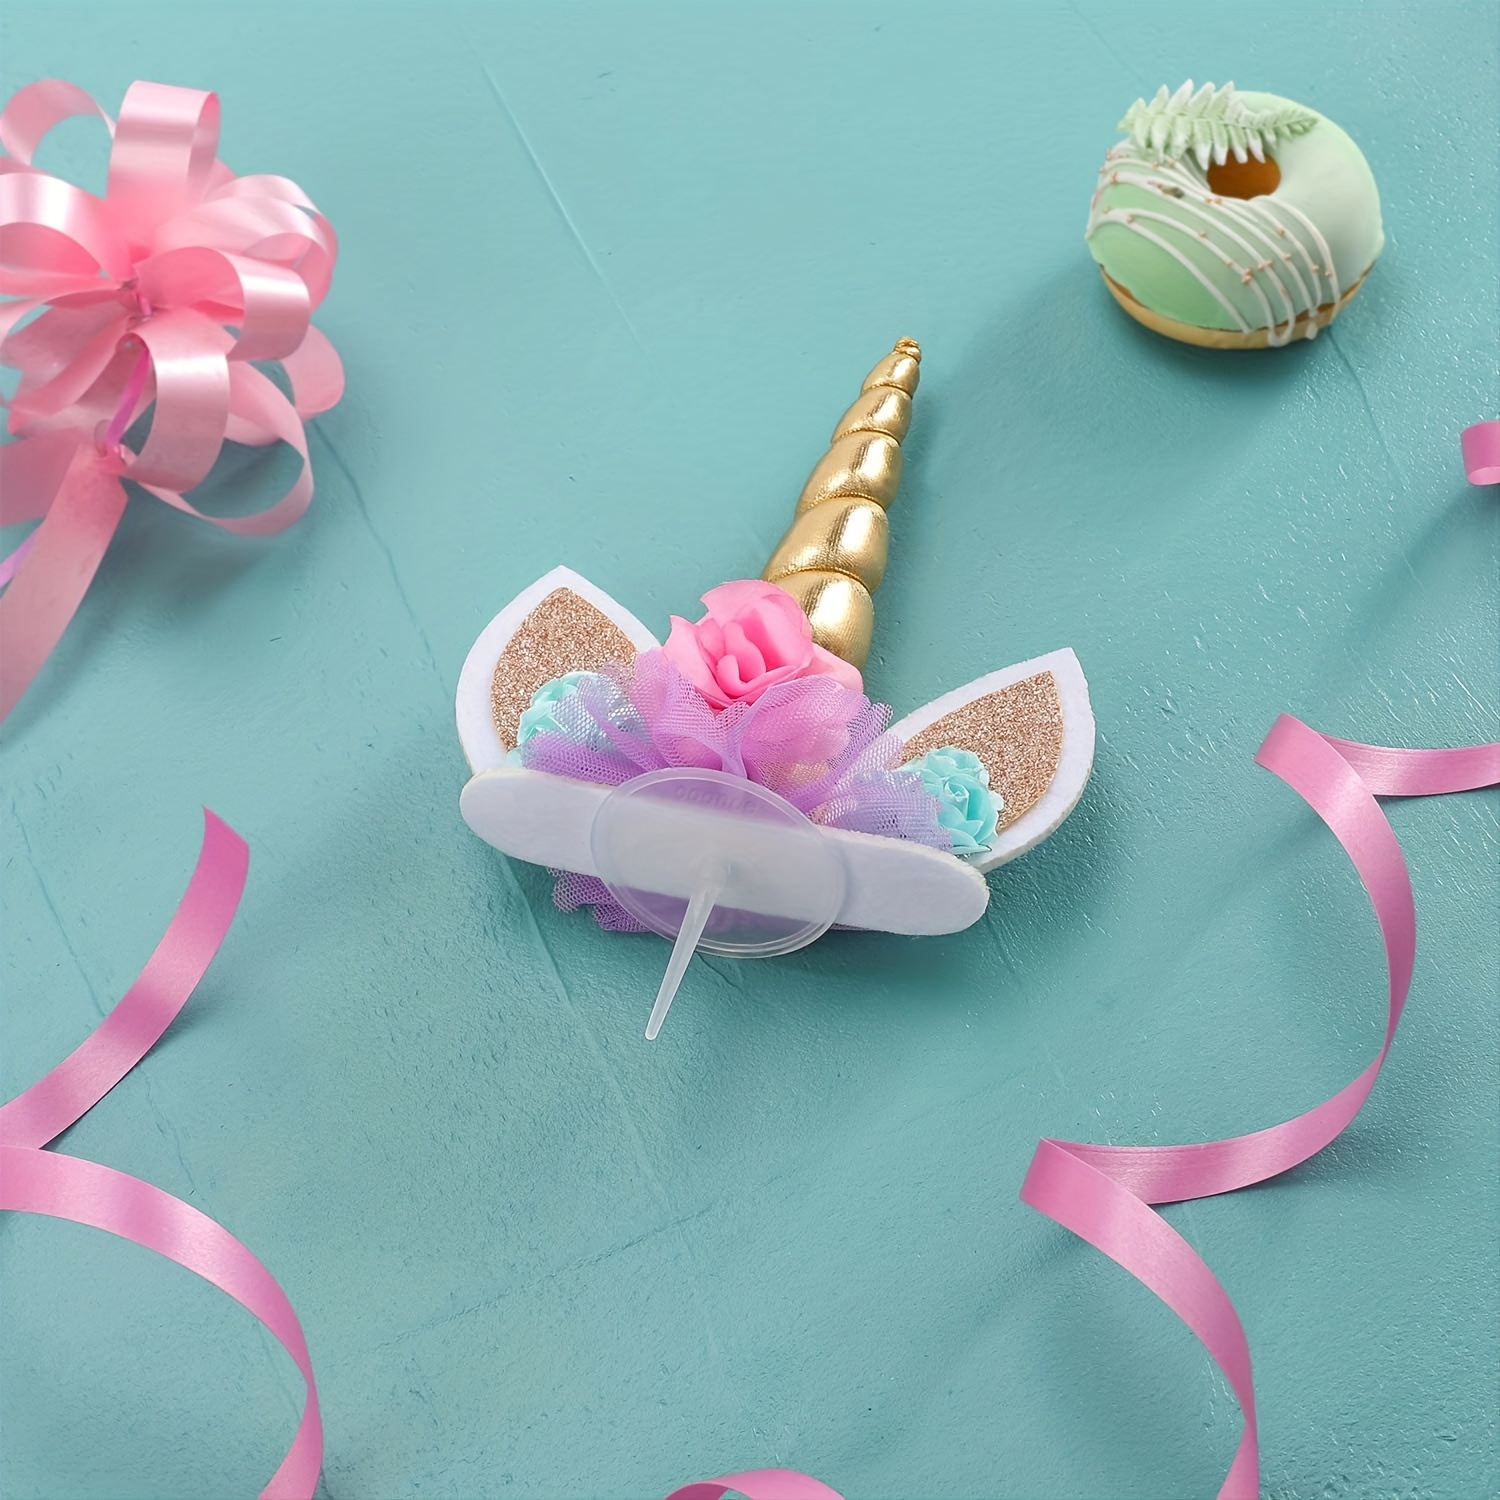 Handmade Gold Unicorn Birthday Cake Toppers set. Unicorn Horn, Ears and  flowers Set. Unicorn Party Decoration for baby shower，wedding and birthday